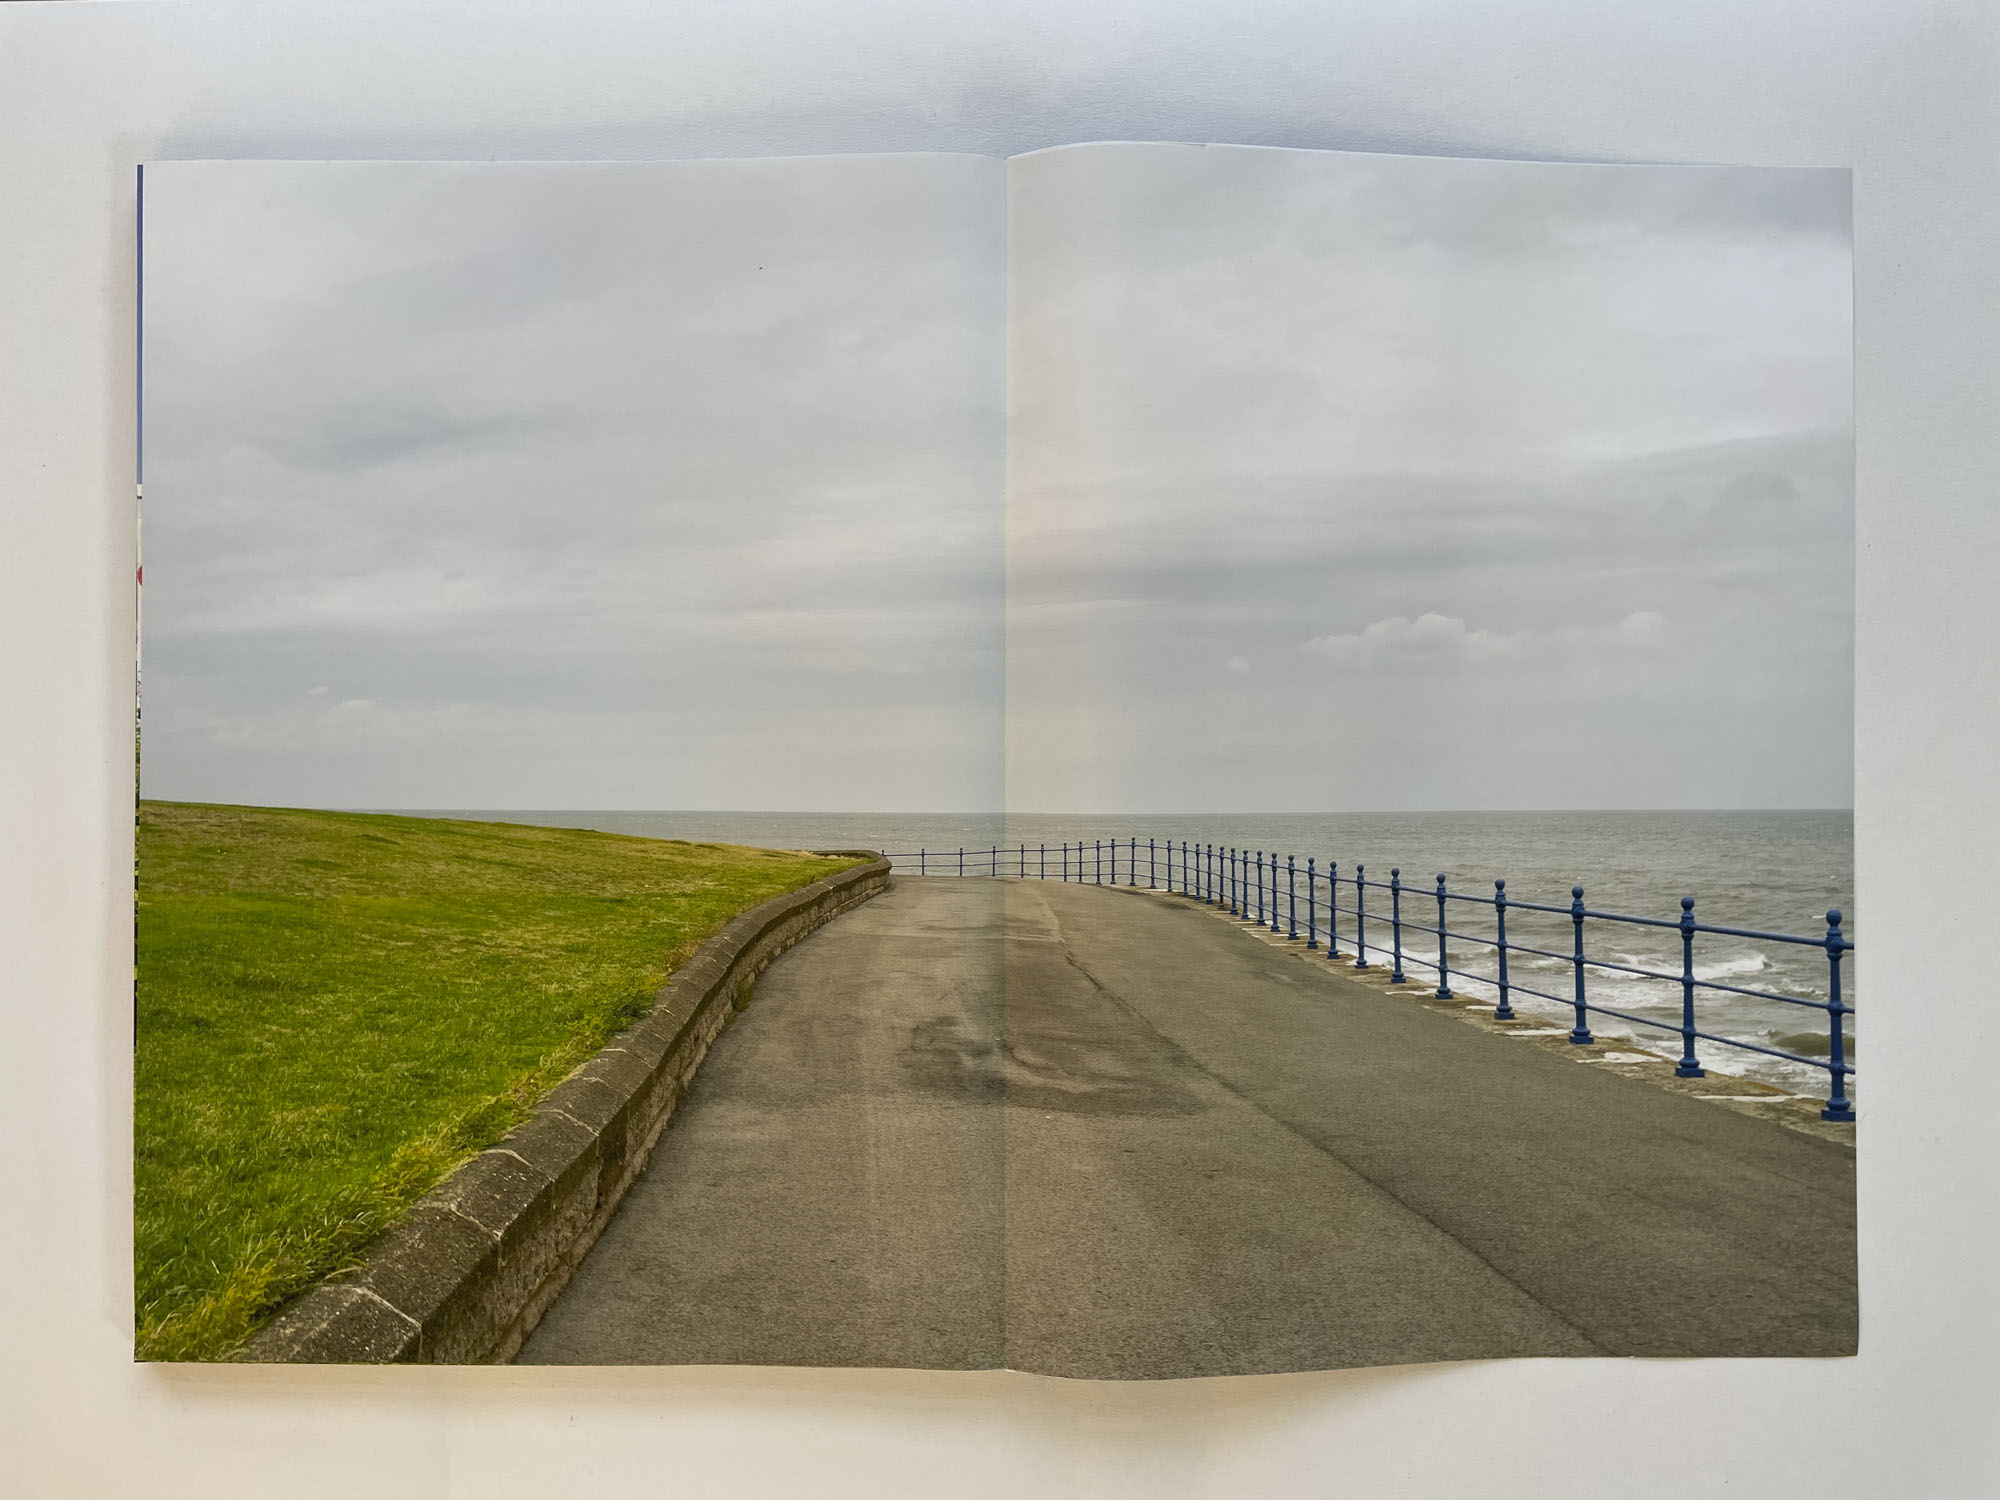 under a grey sky a wide road traces the edge of land, a blue railing separates it from the sea